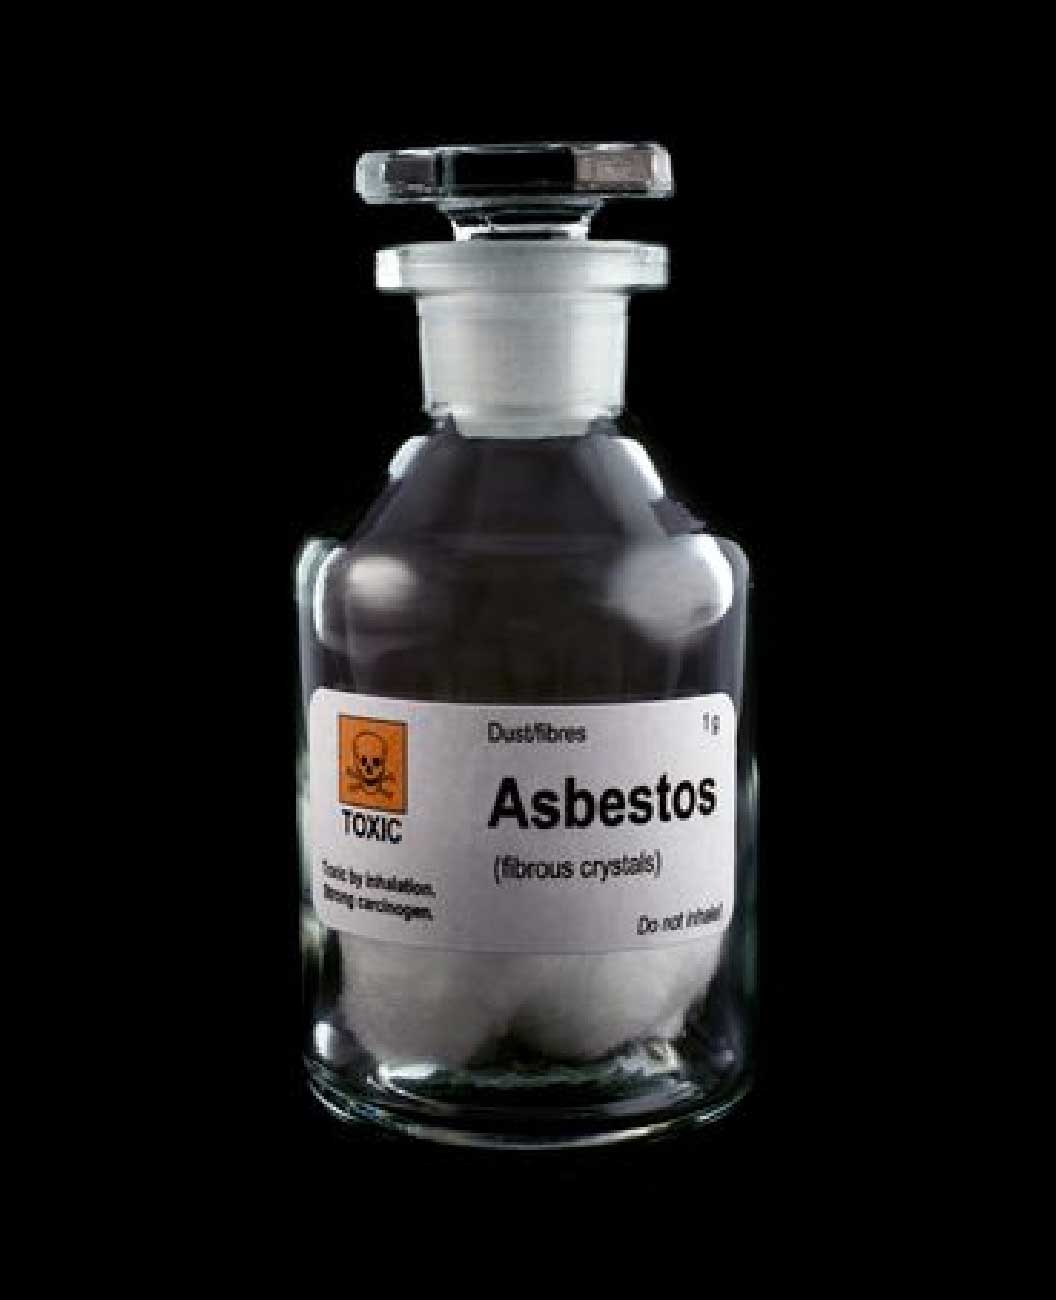 Specific asbestos testing precedures are required to determine the type of asbestos detected